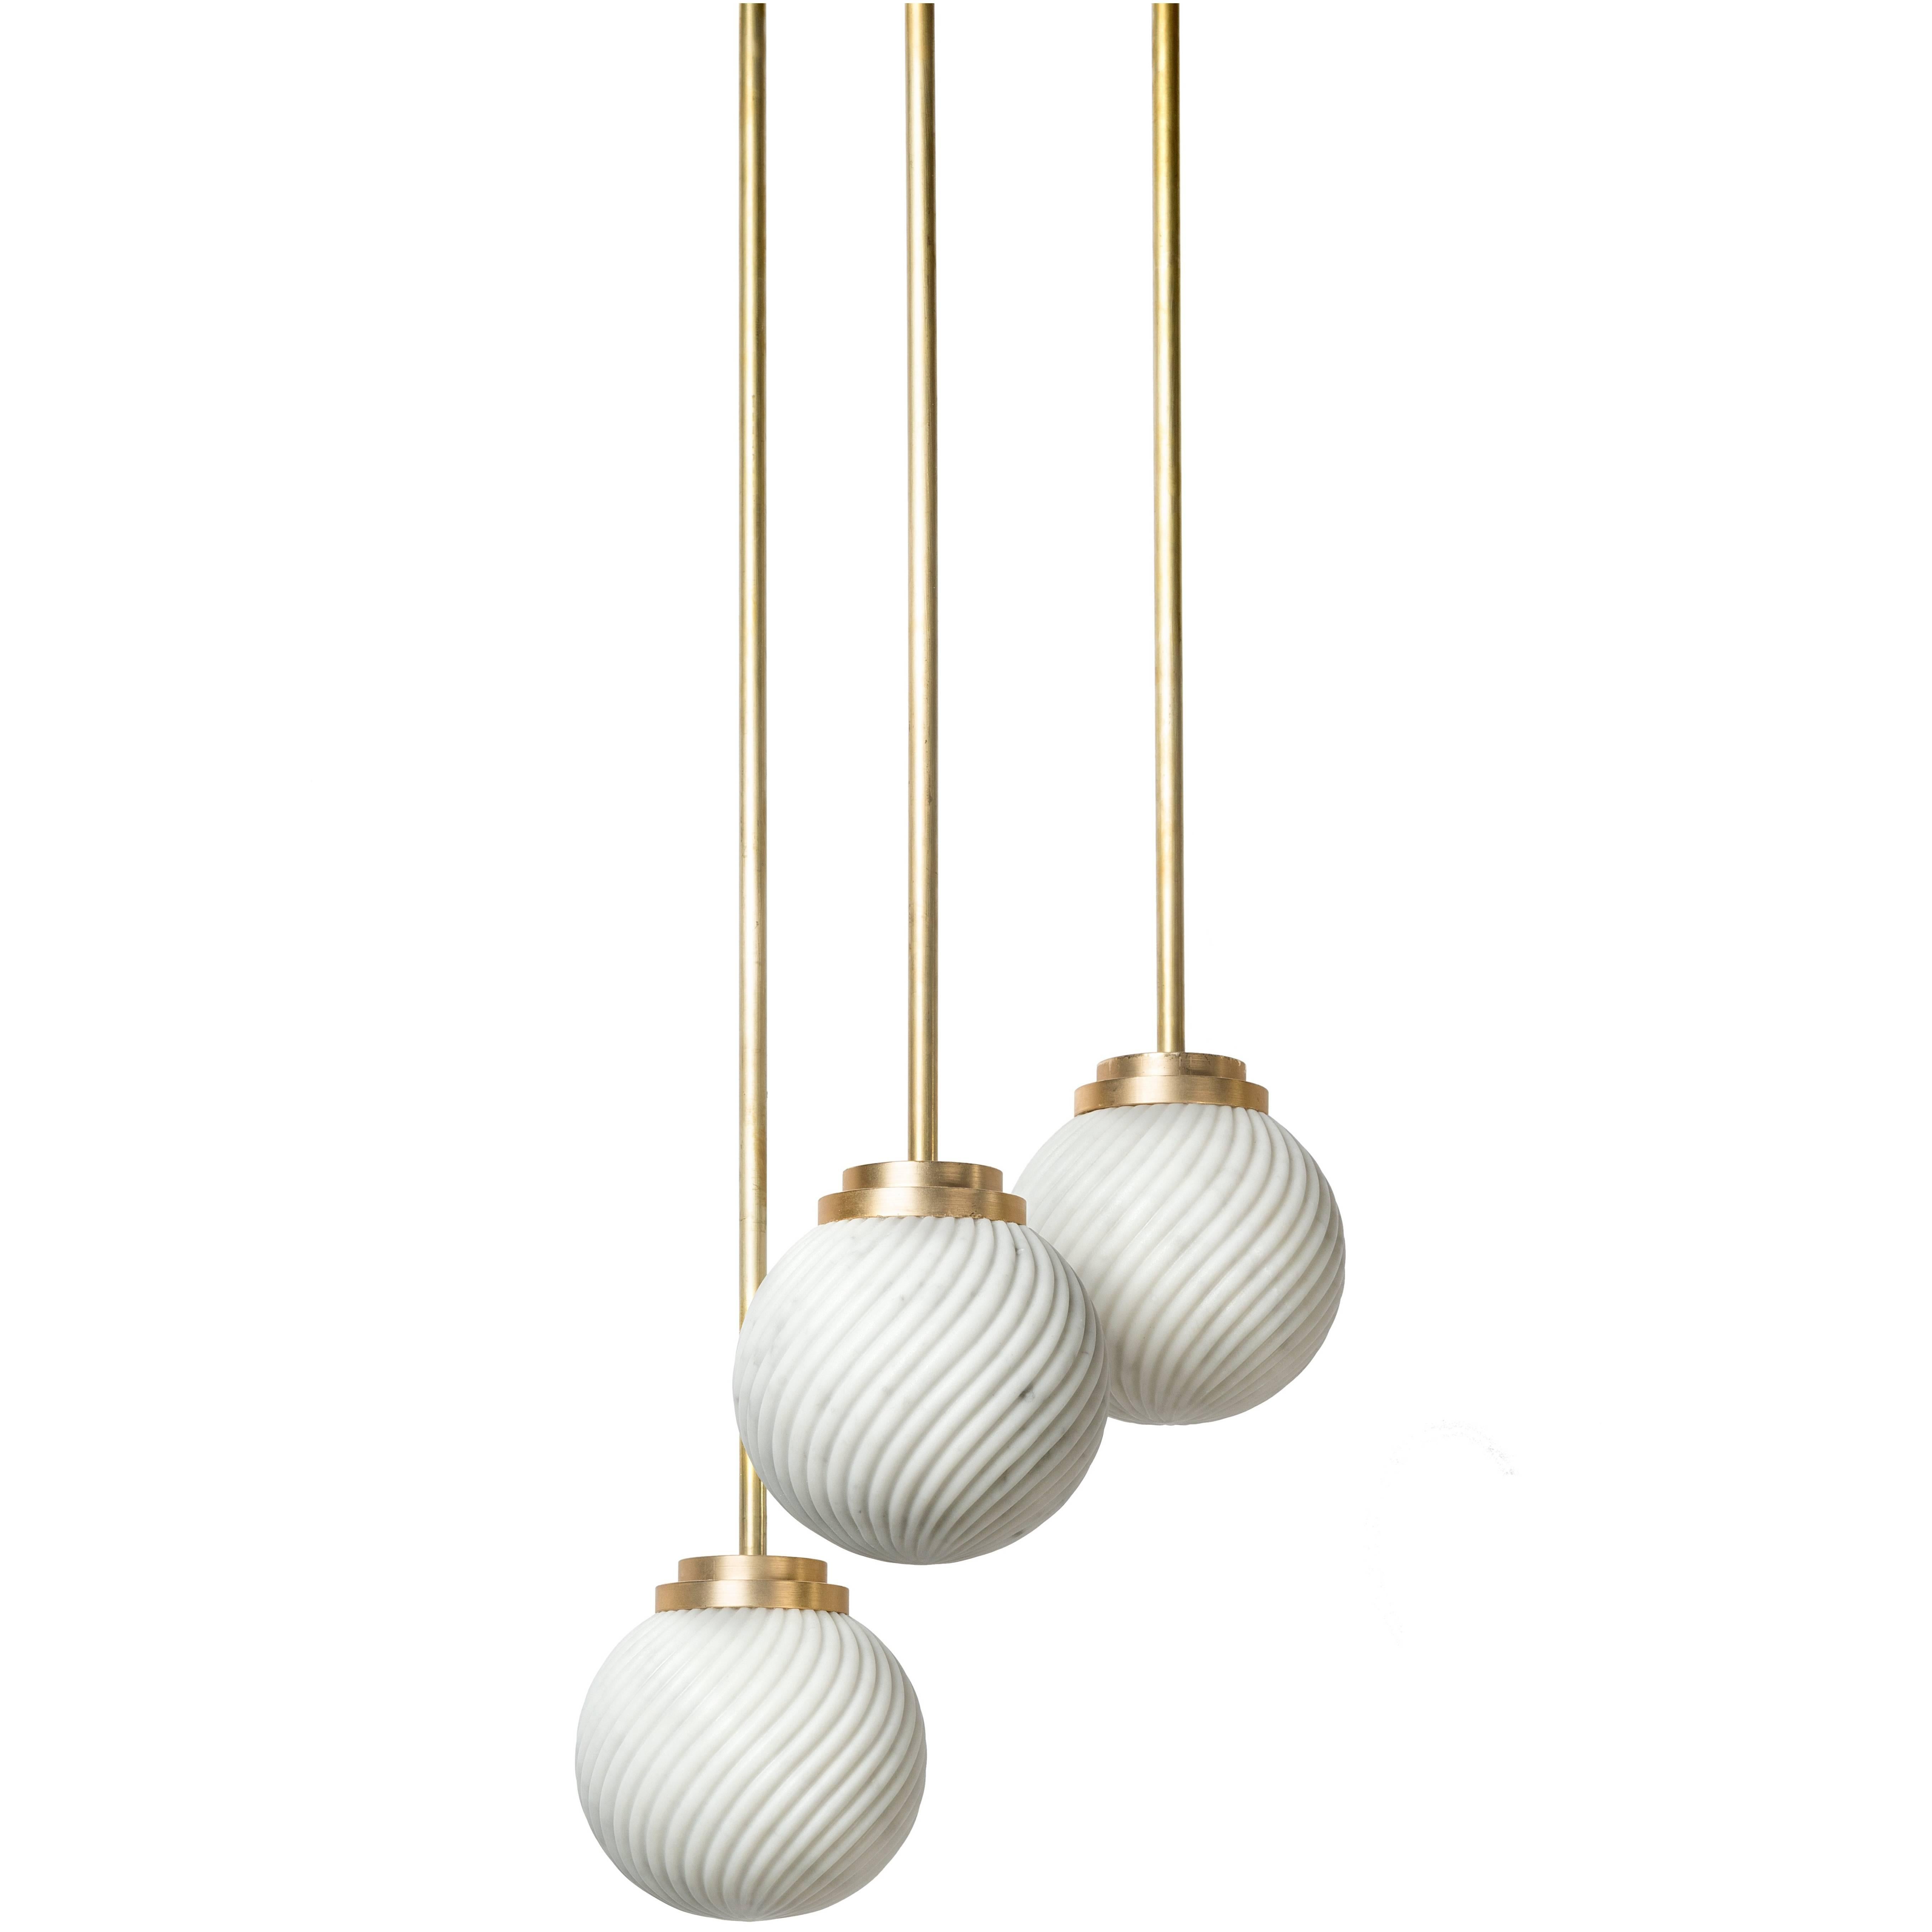 Victoria Chandelier, by Bethan Gray for Editions Milano im Angebot